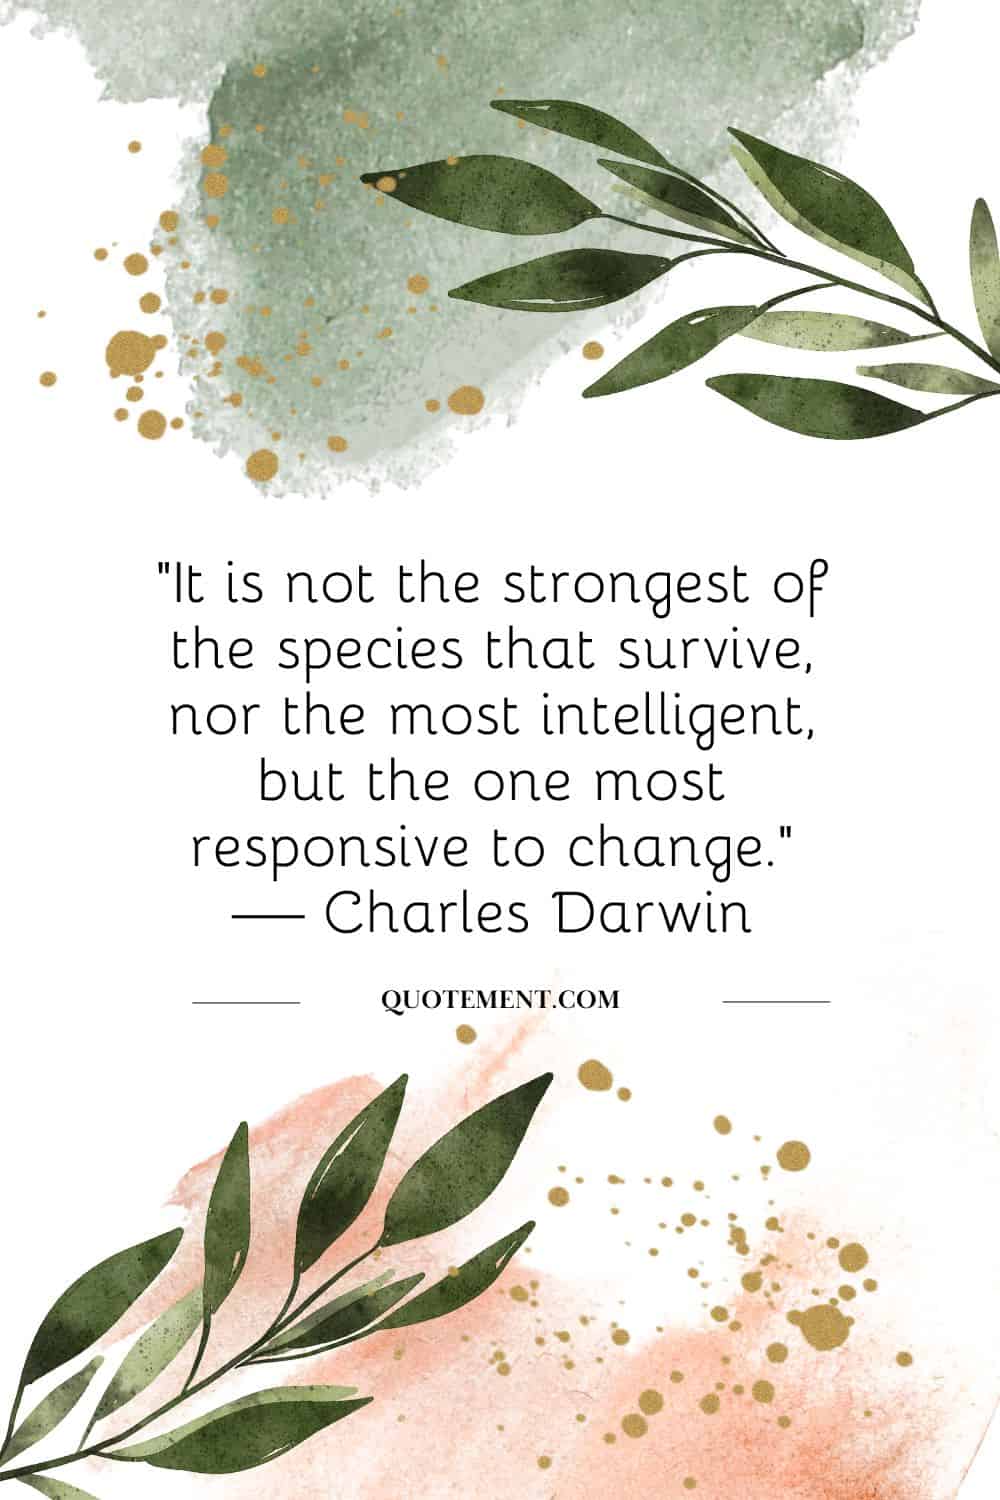 “It is not the strongest of the species that survive, nor the most intelligent, but the one most responsive to change.” — Charles Darwin